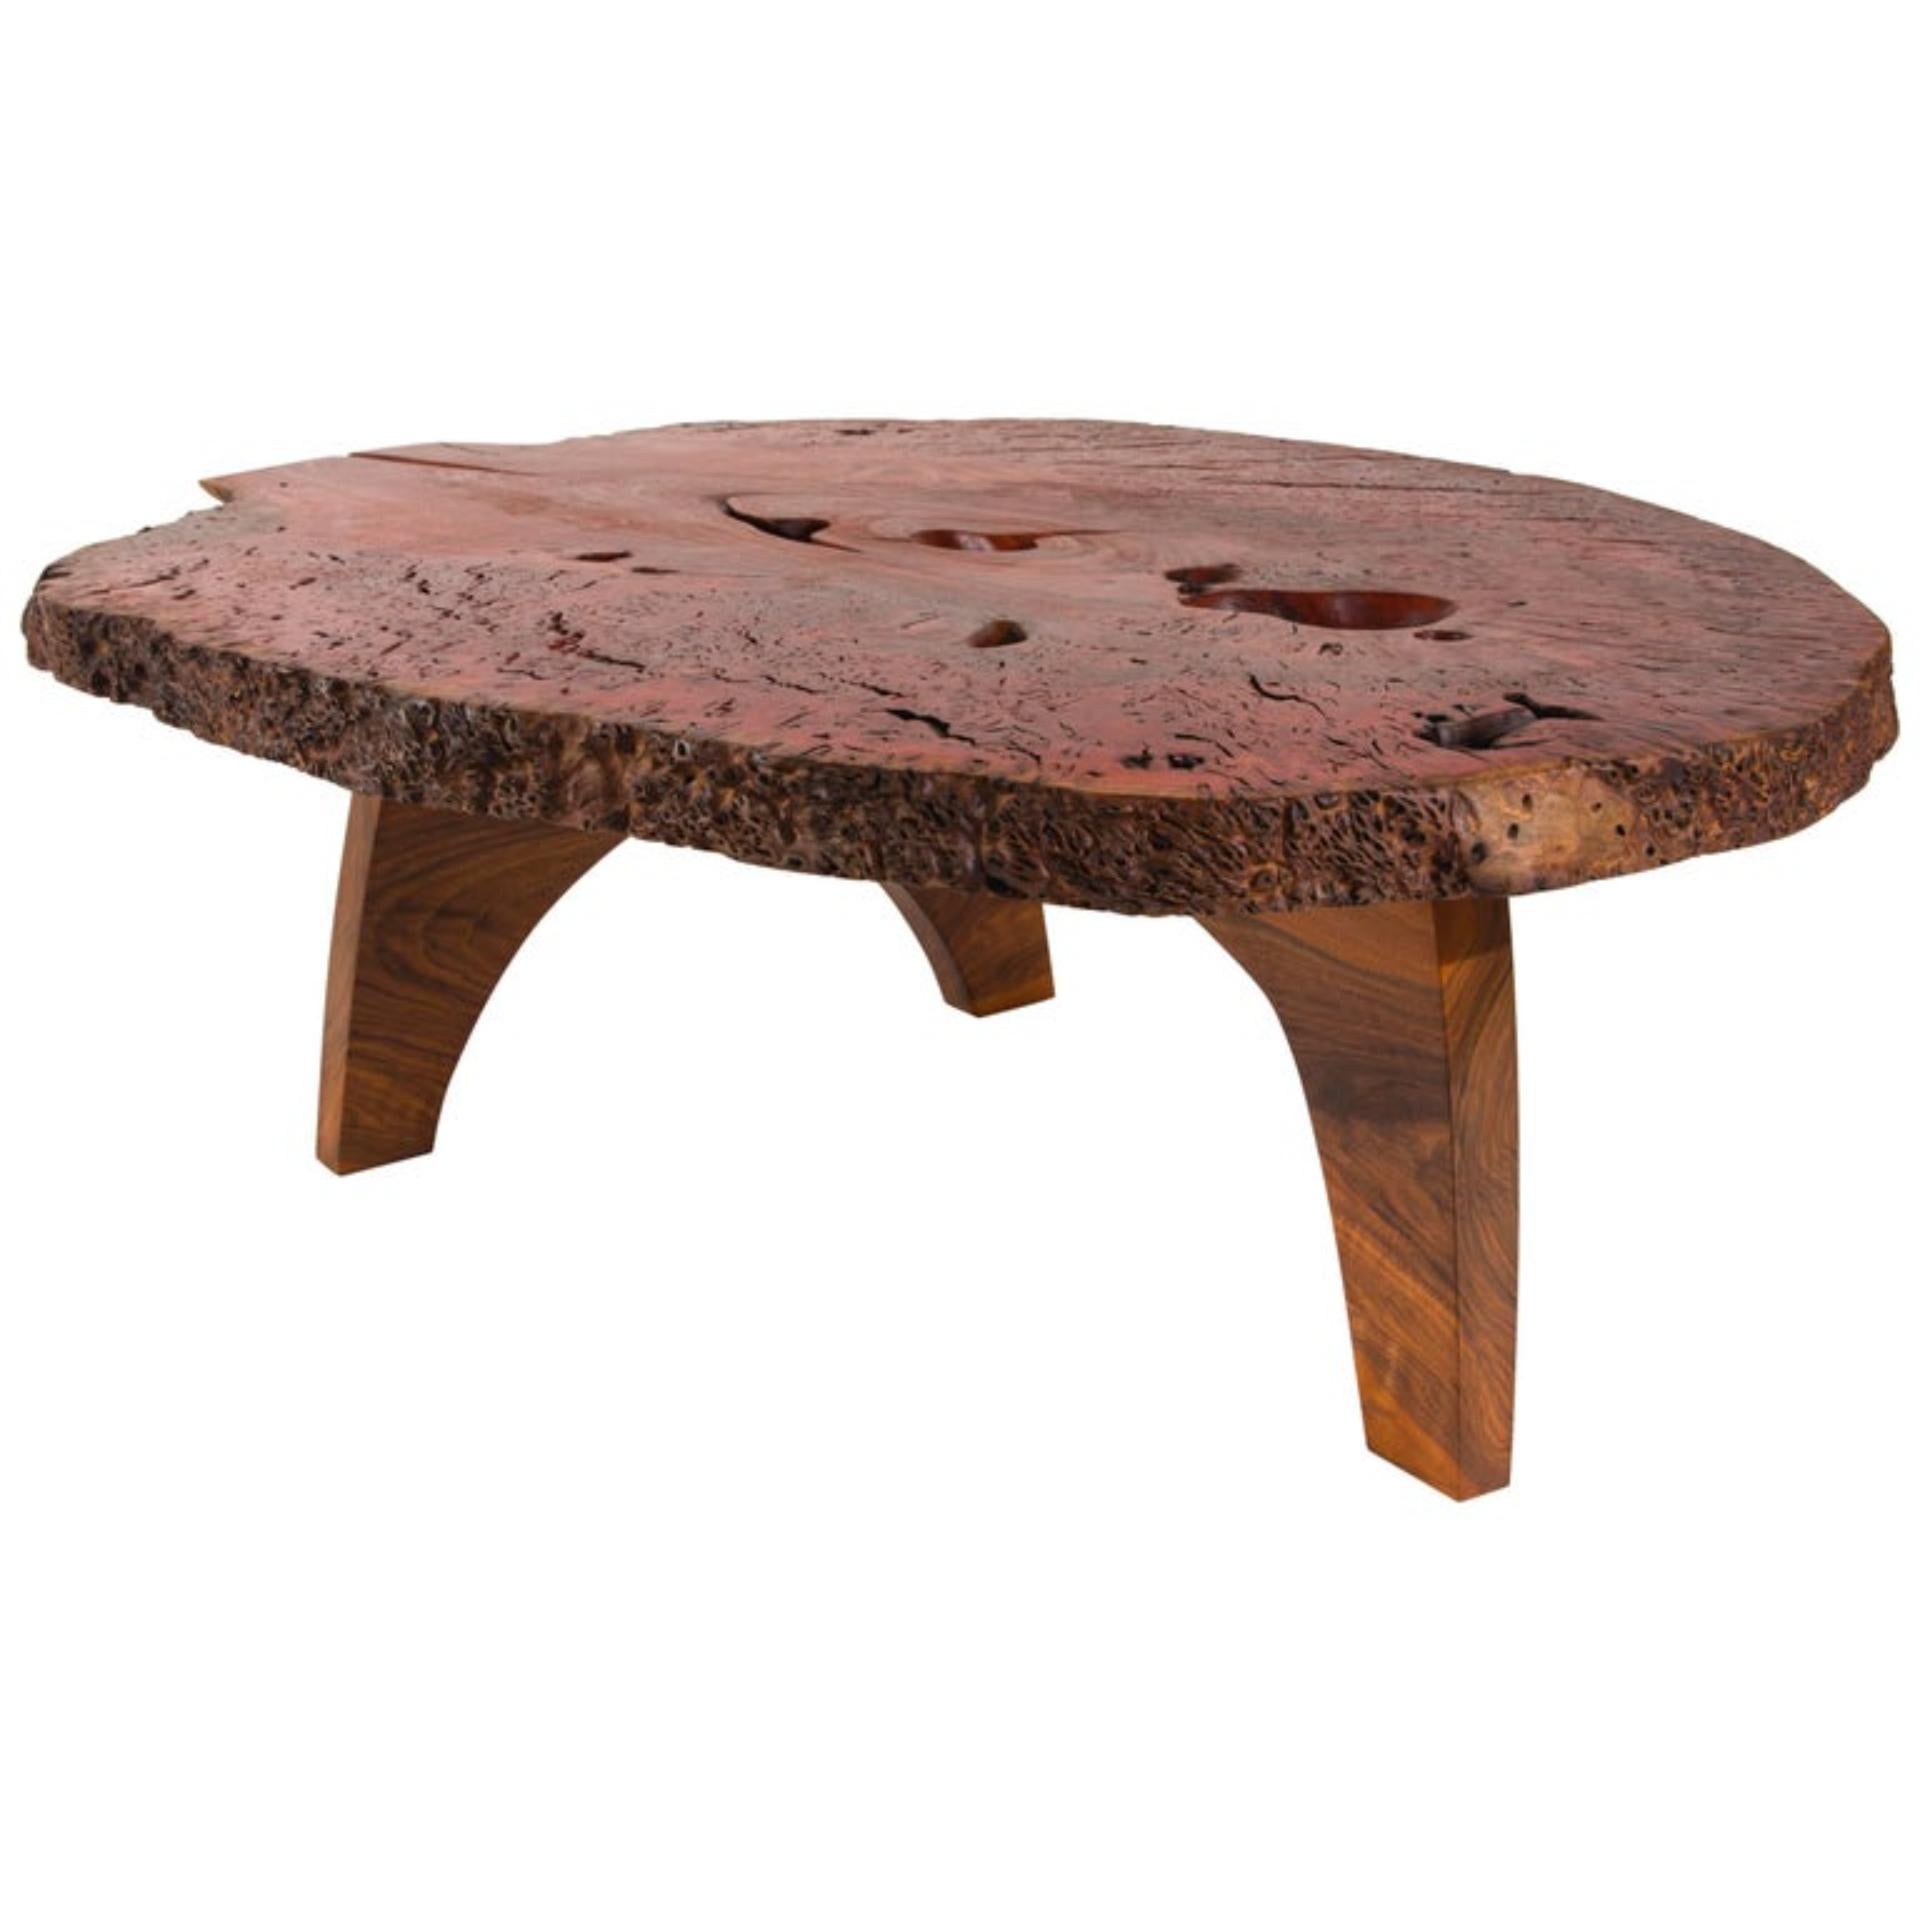 Unique signed table by Jörg Pietschmann
Table · Jarrah Maser / European walnut
Measures: H 38 x W 118 x D 85 cm tabletop 4.5 cm
Cavities and structures finely elaborated. Warm dark red color.
Leg grains with very clear pattern.


In